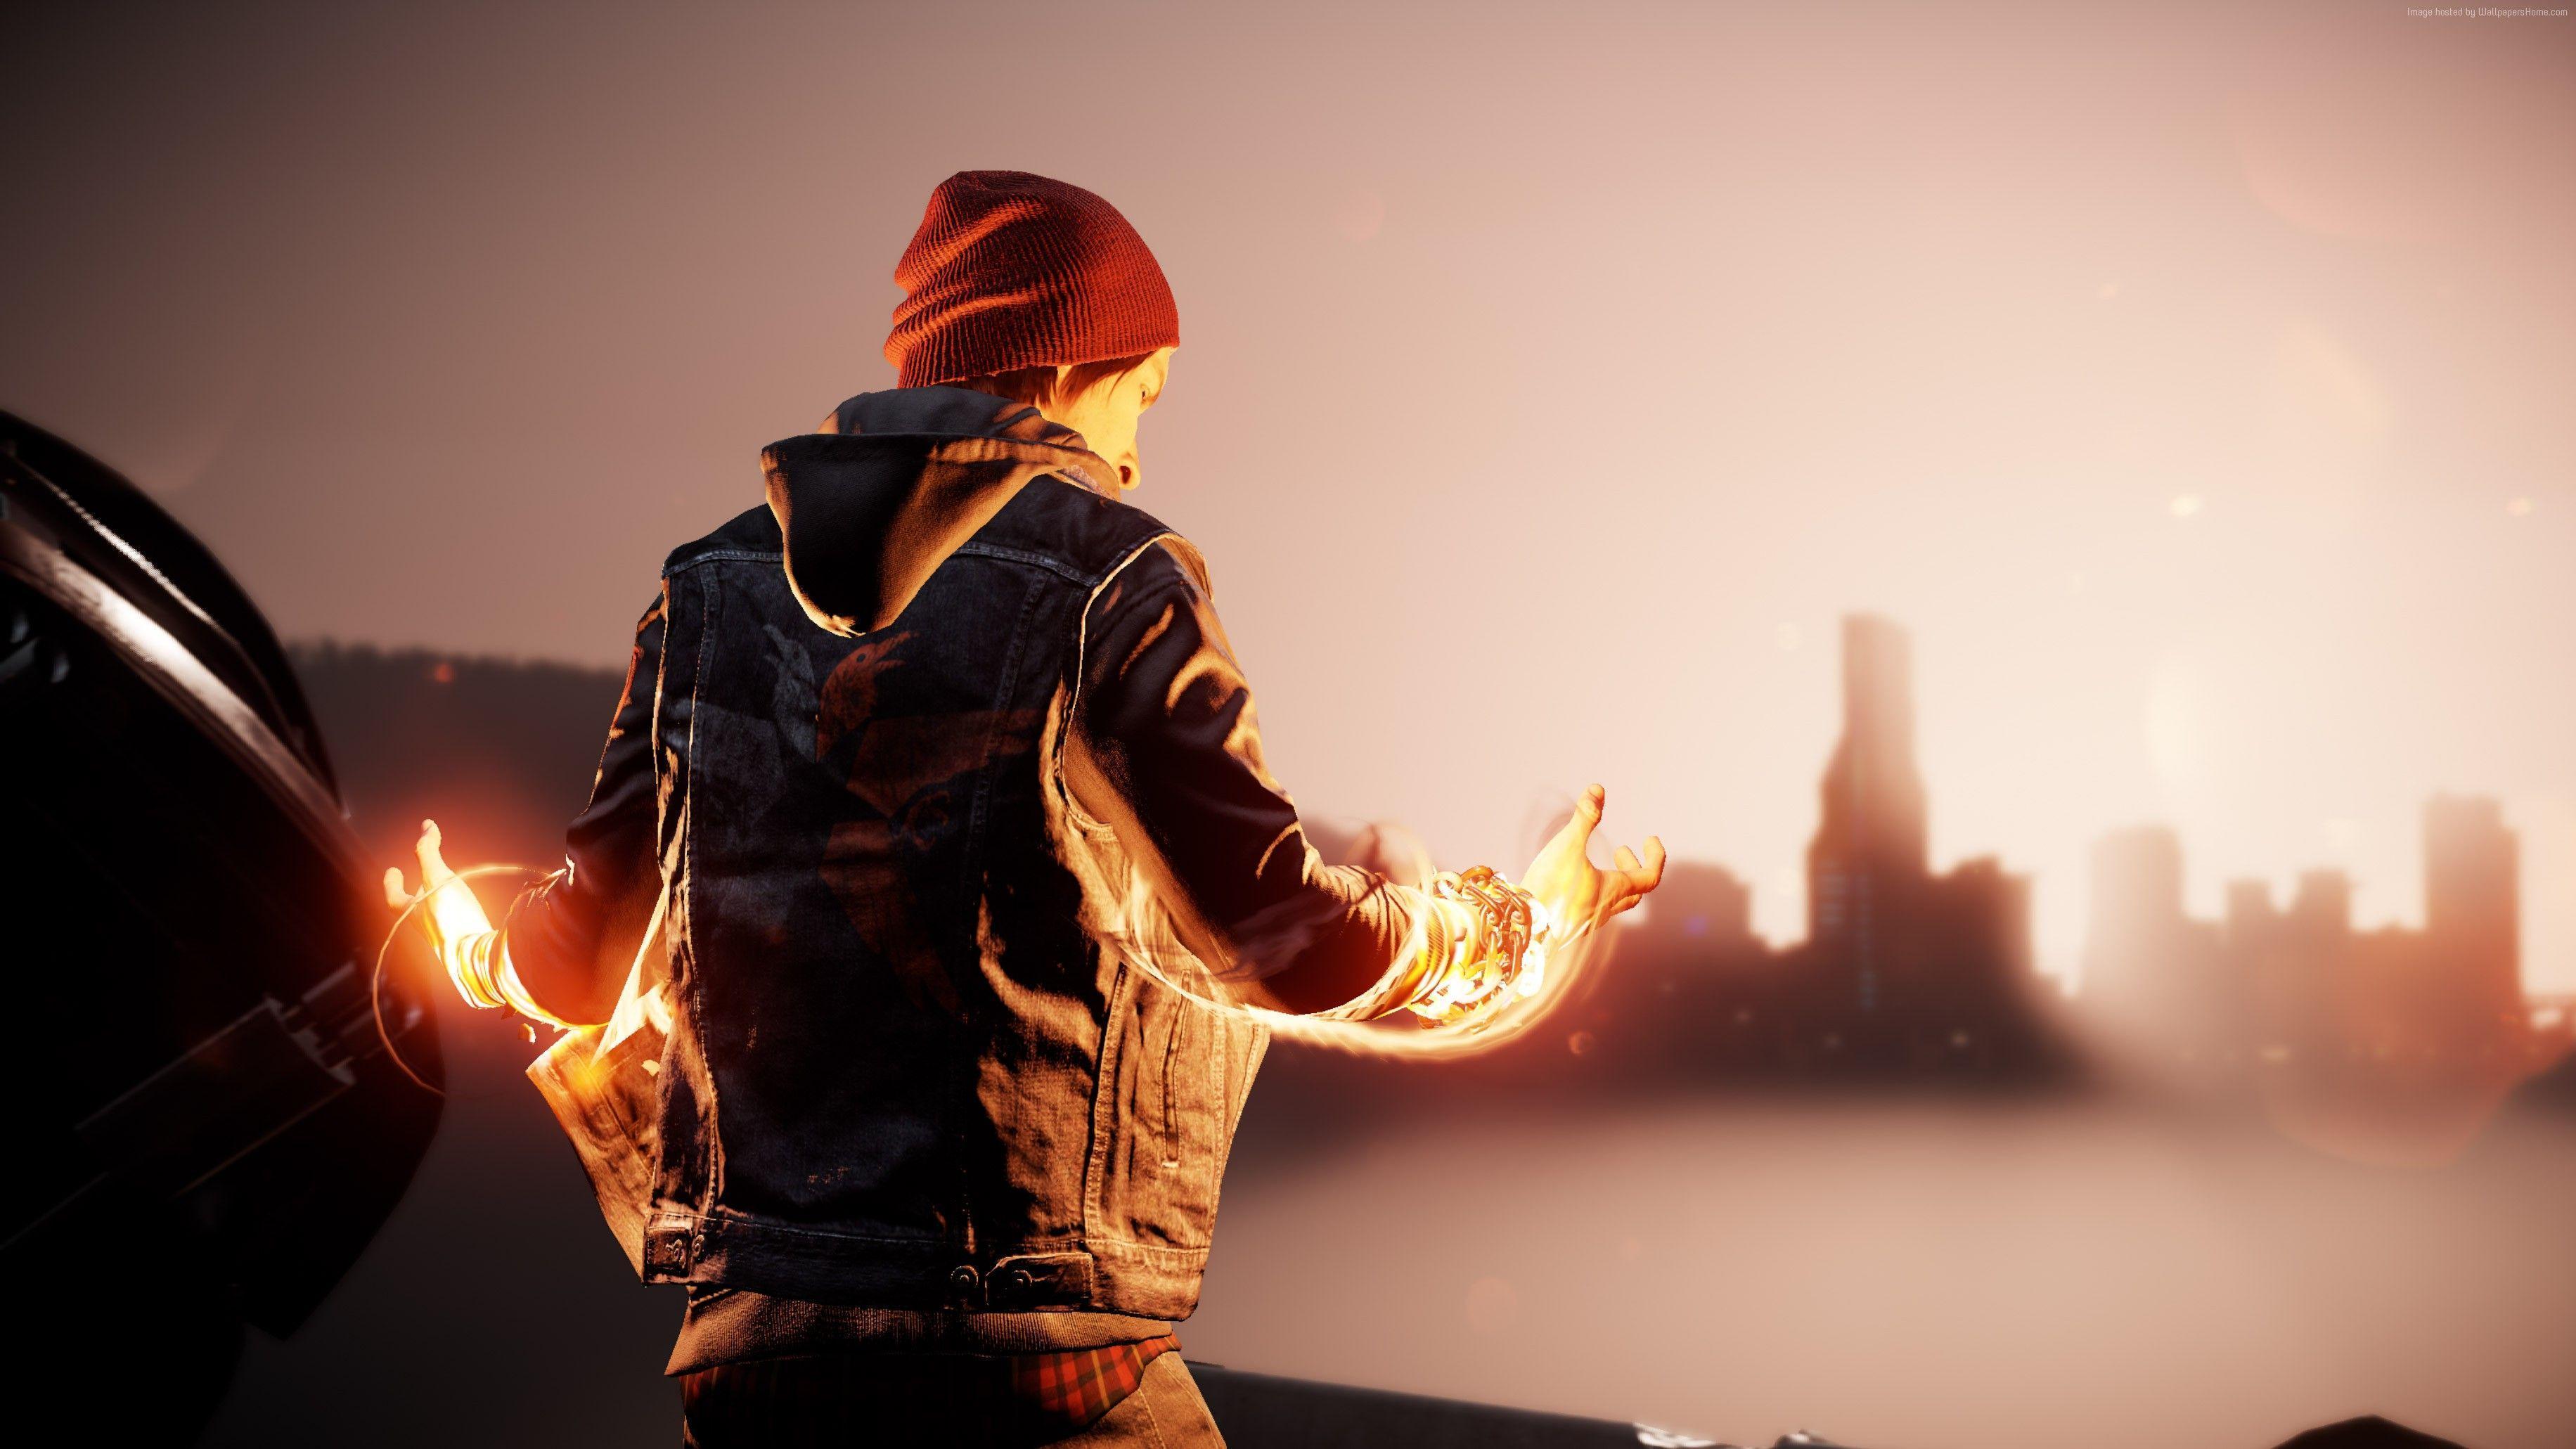 Infamous: Second Son Wallpaper, Games: Infamous: Second Son, First